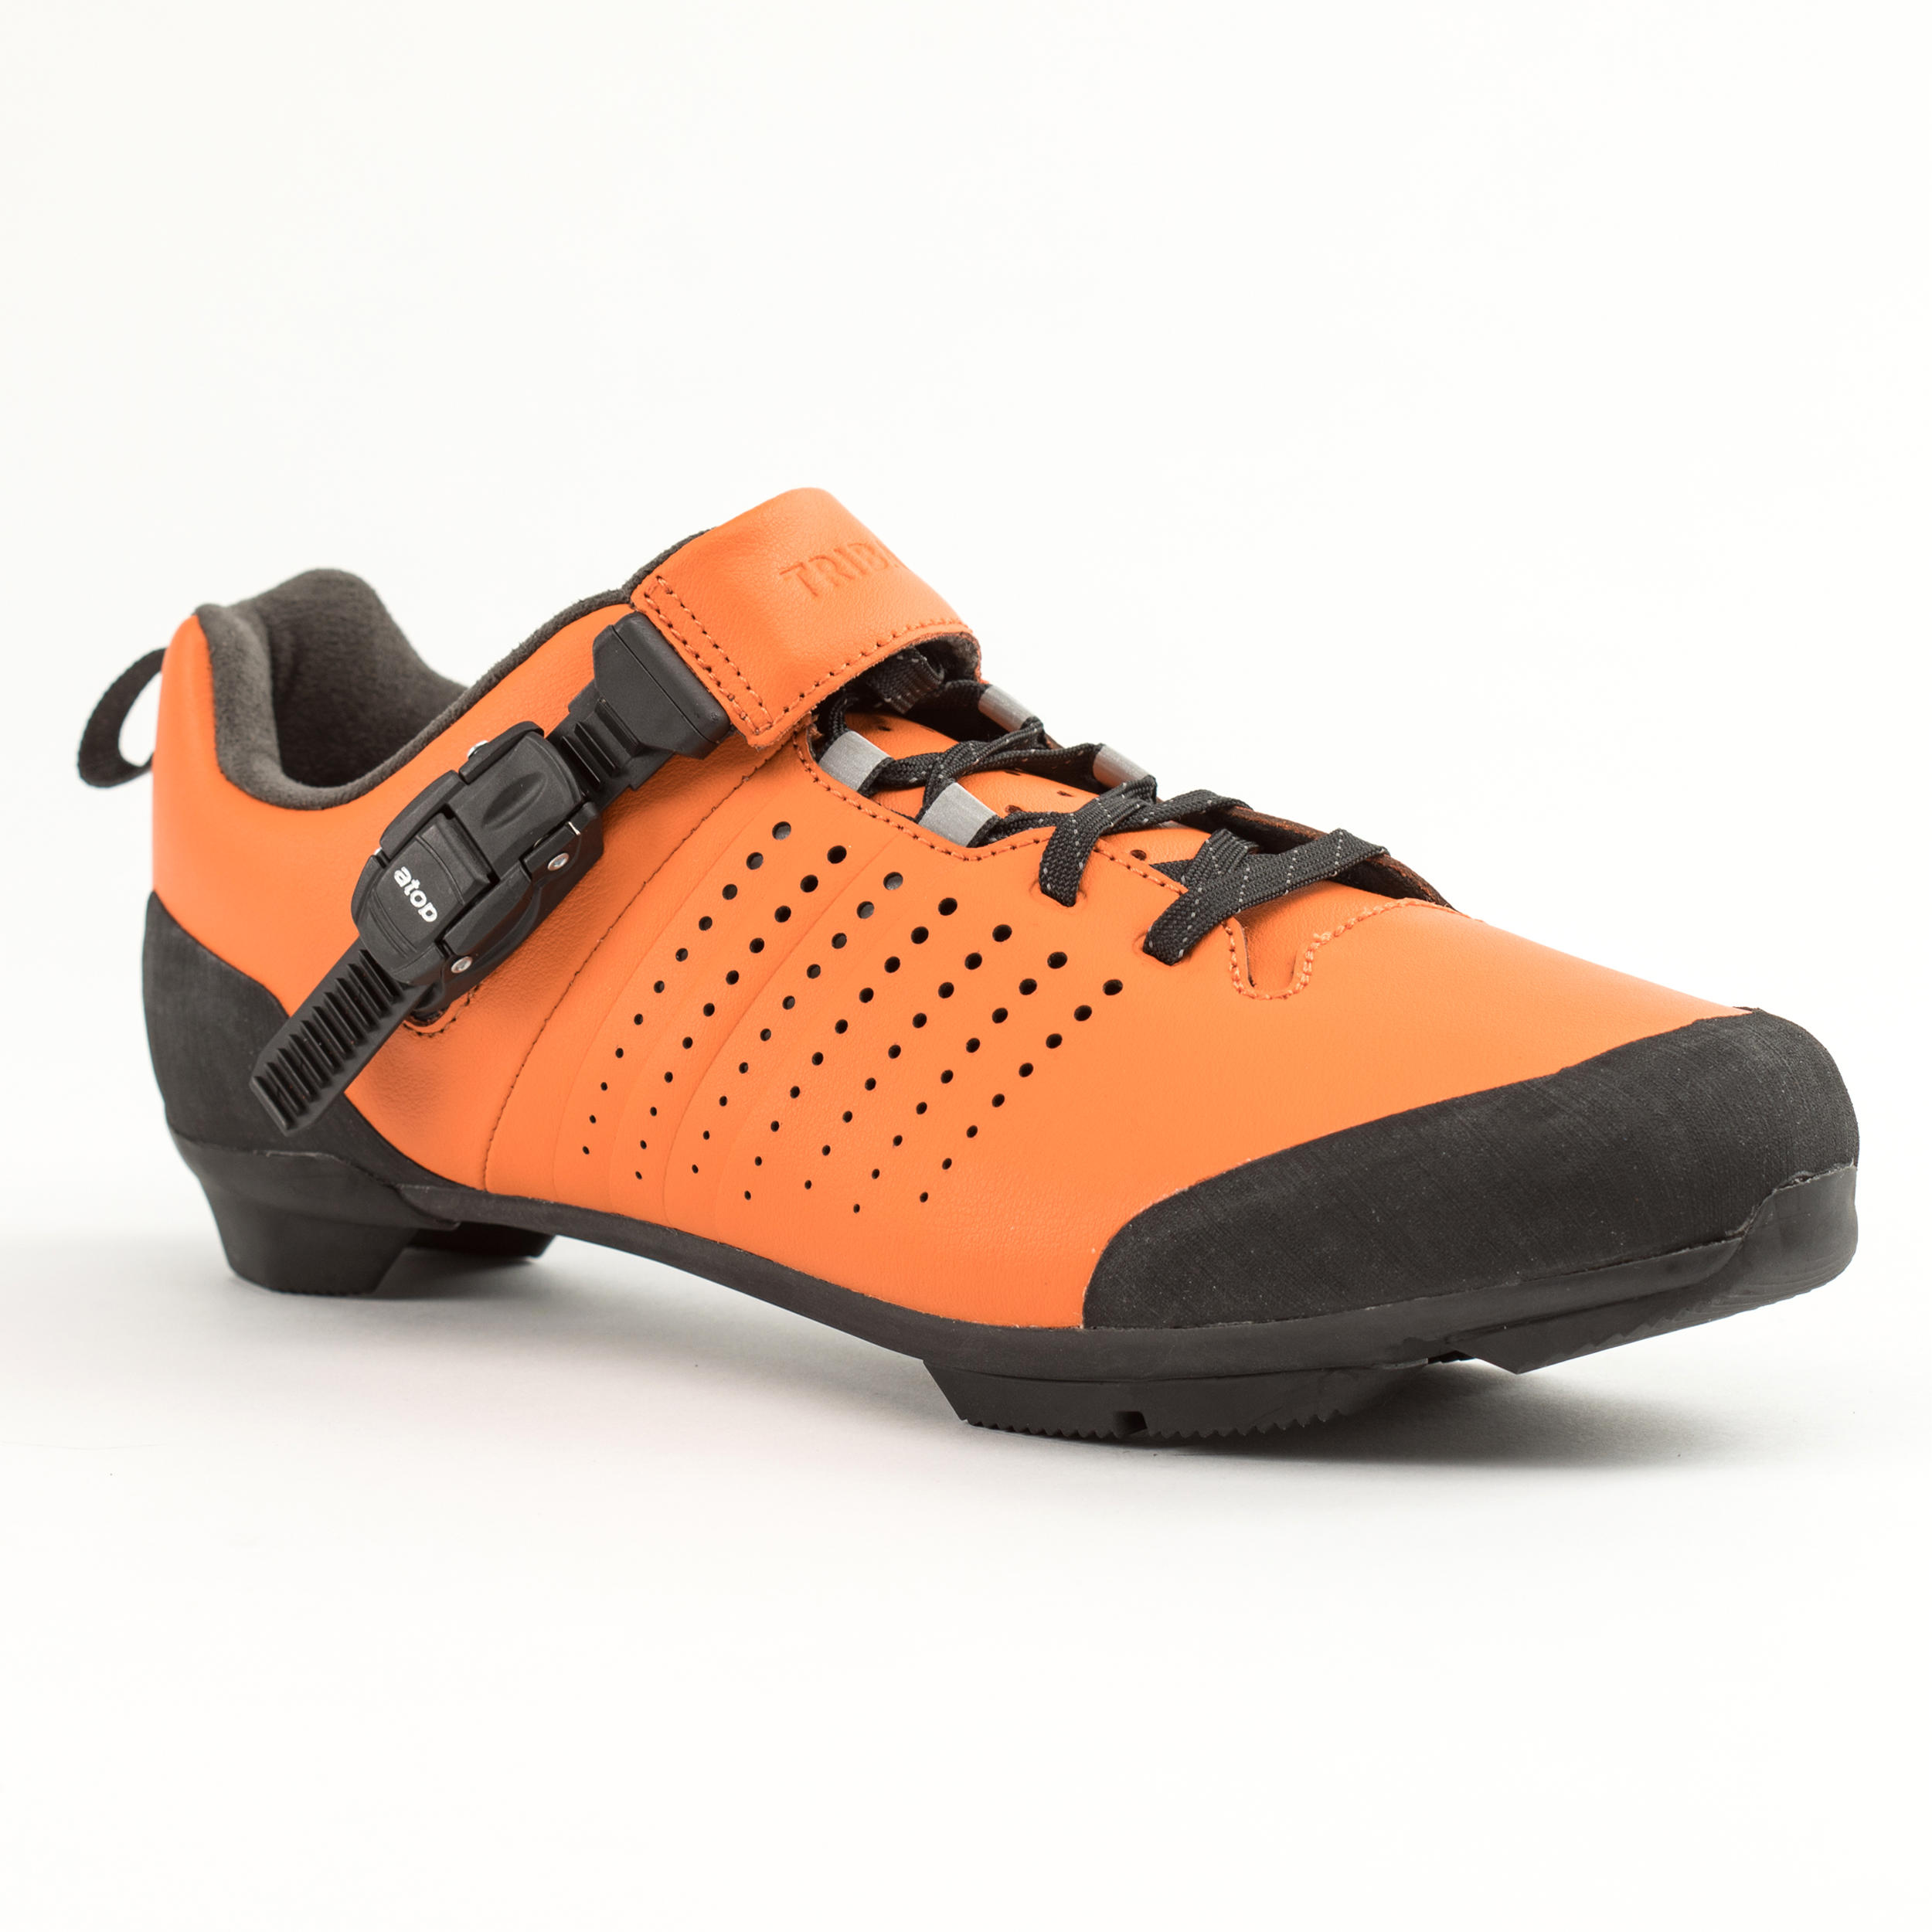 TRIBAN Road and Gravel Cycling Leather Lace-Up SPD Shoes GRVL 520 - Orange